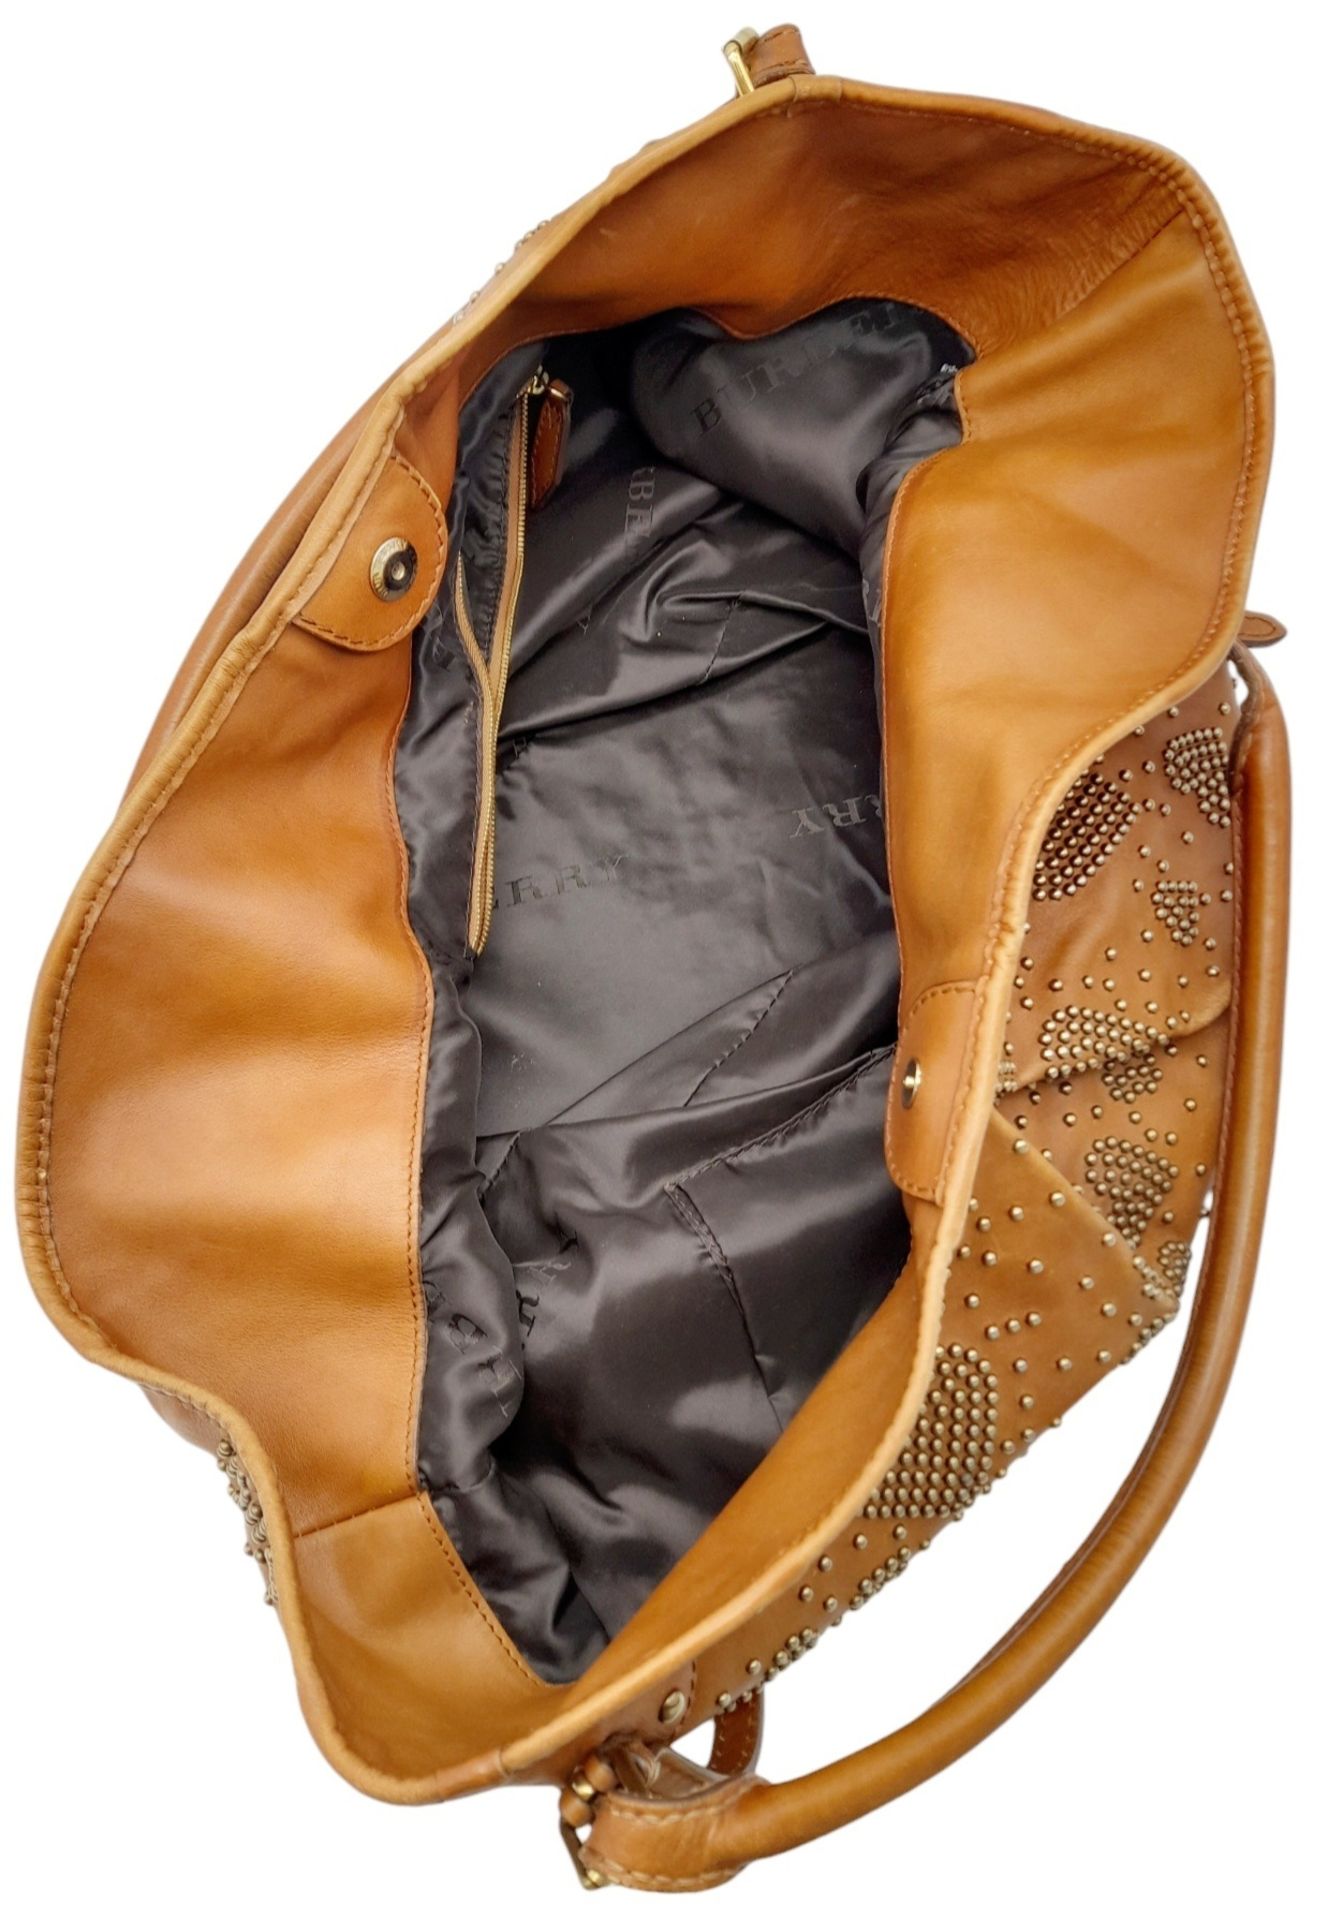 A Burberry Tan Studded Heart Hobo Bag. Leather exterior with stud embellishments, golden-toned - Image 5 of 8